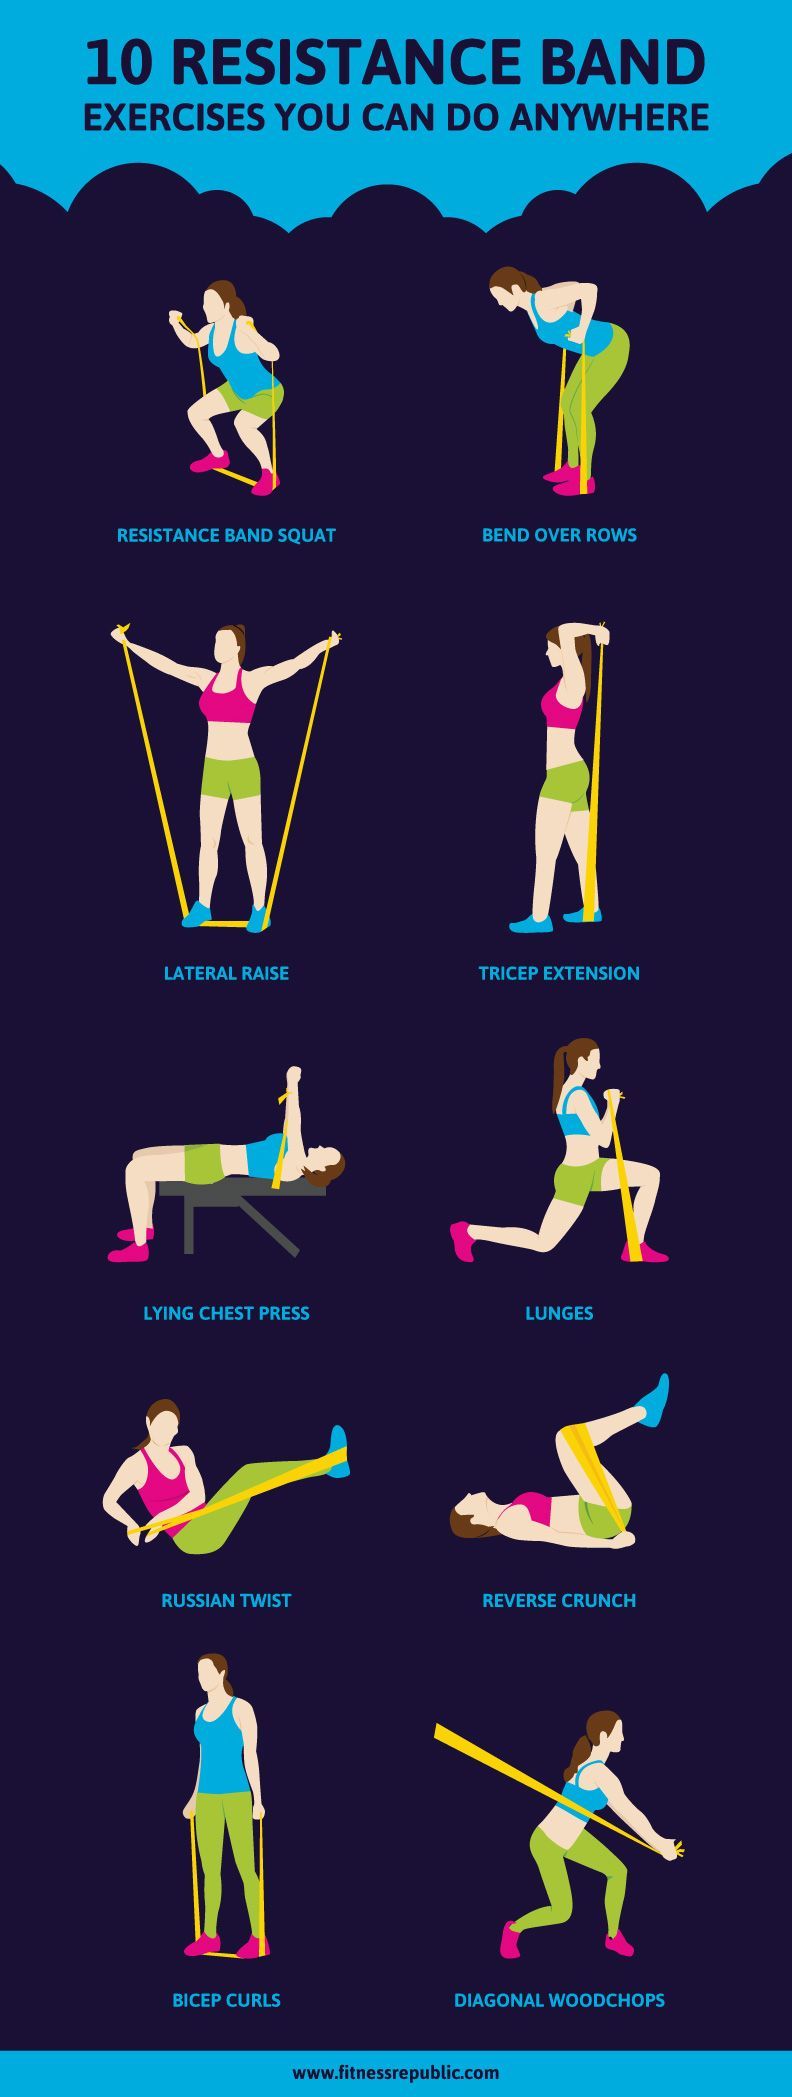 10 Resistance Band Exercises…good for travel